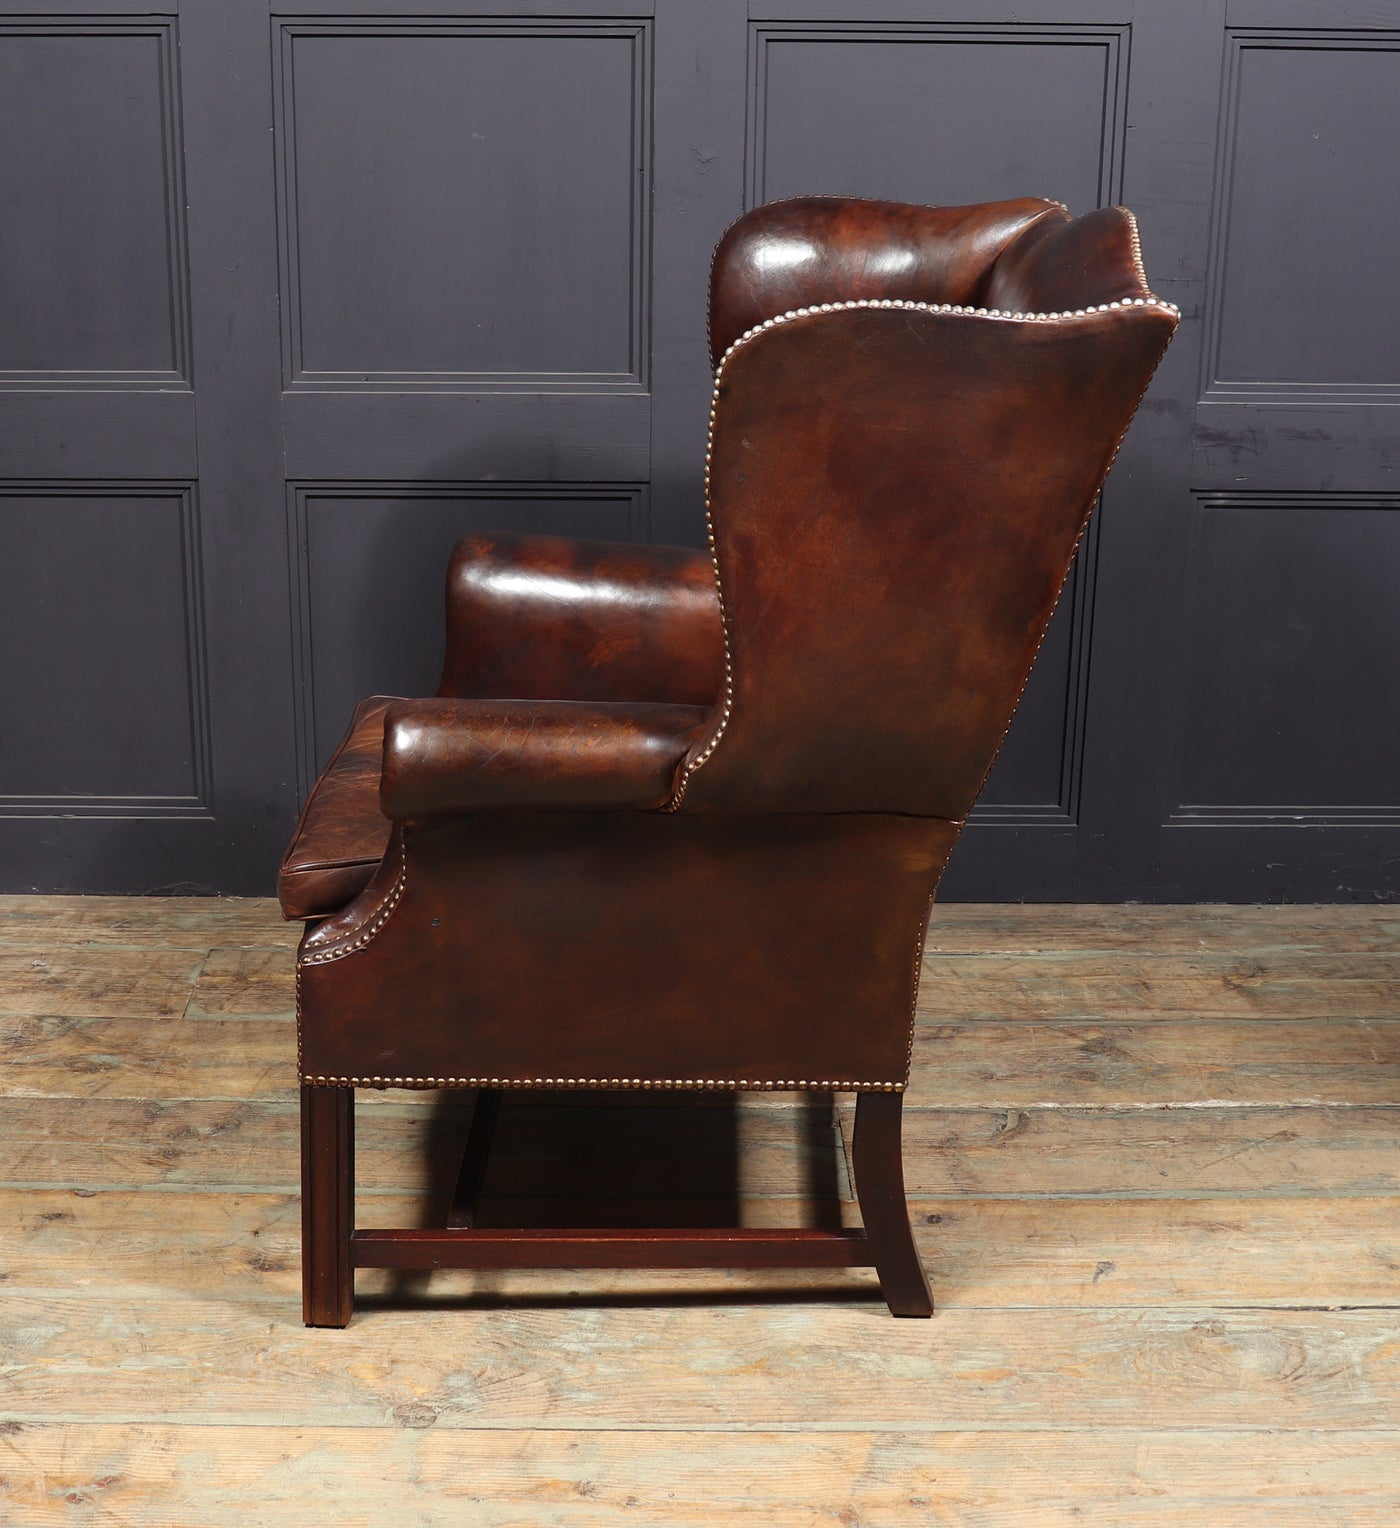 Vintage Brown Leather Wing Chair